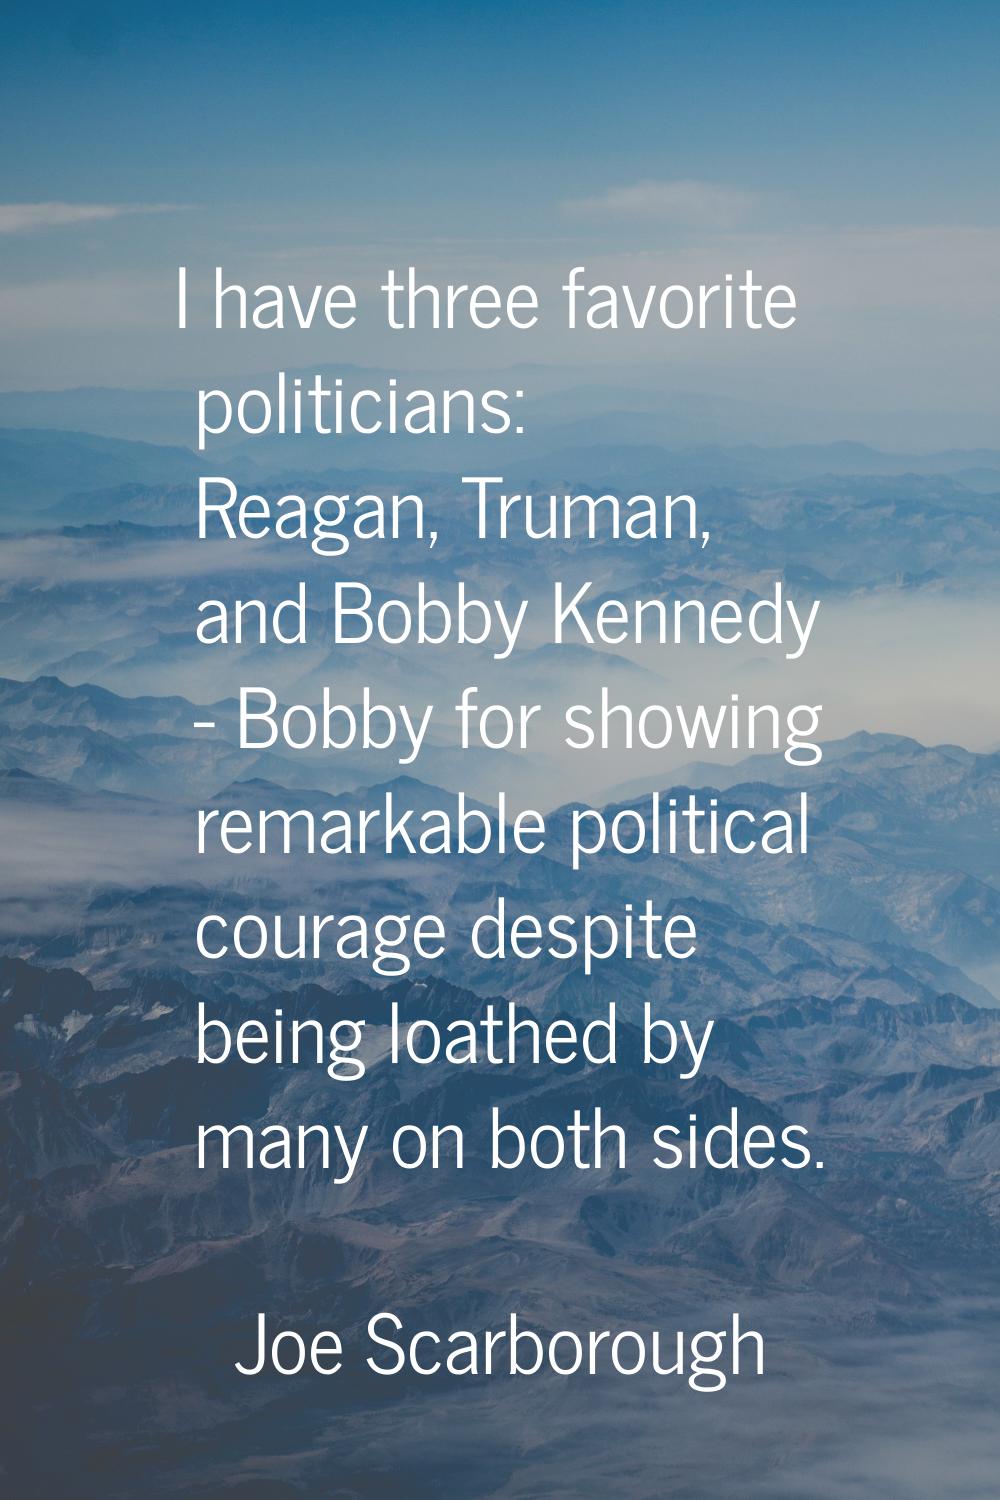 I have three favorite politicians: Reagan, Truman, and Bobby Kennedy - Bobby for showing remarkable